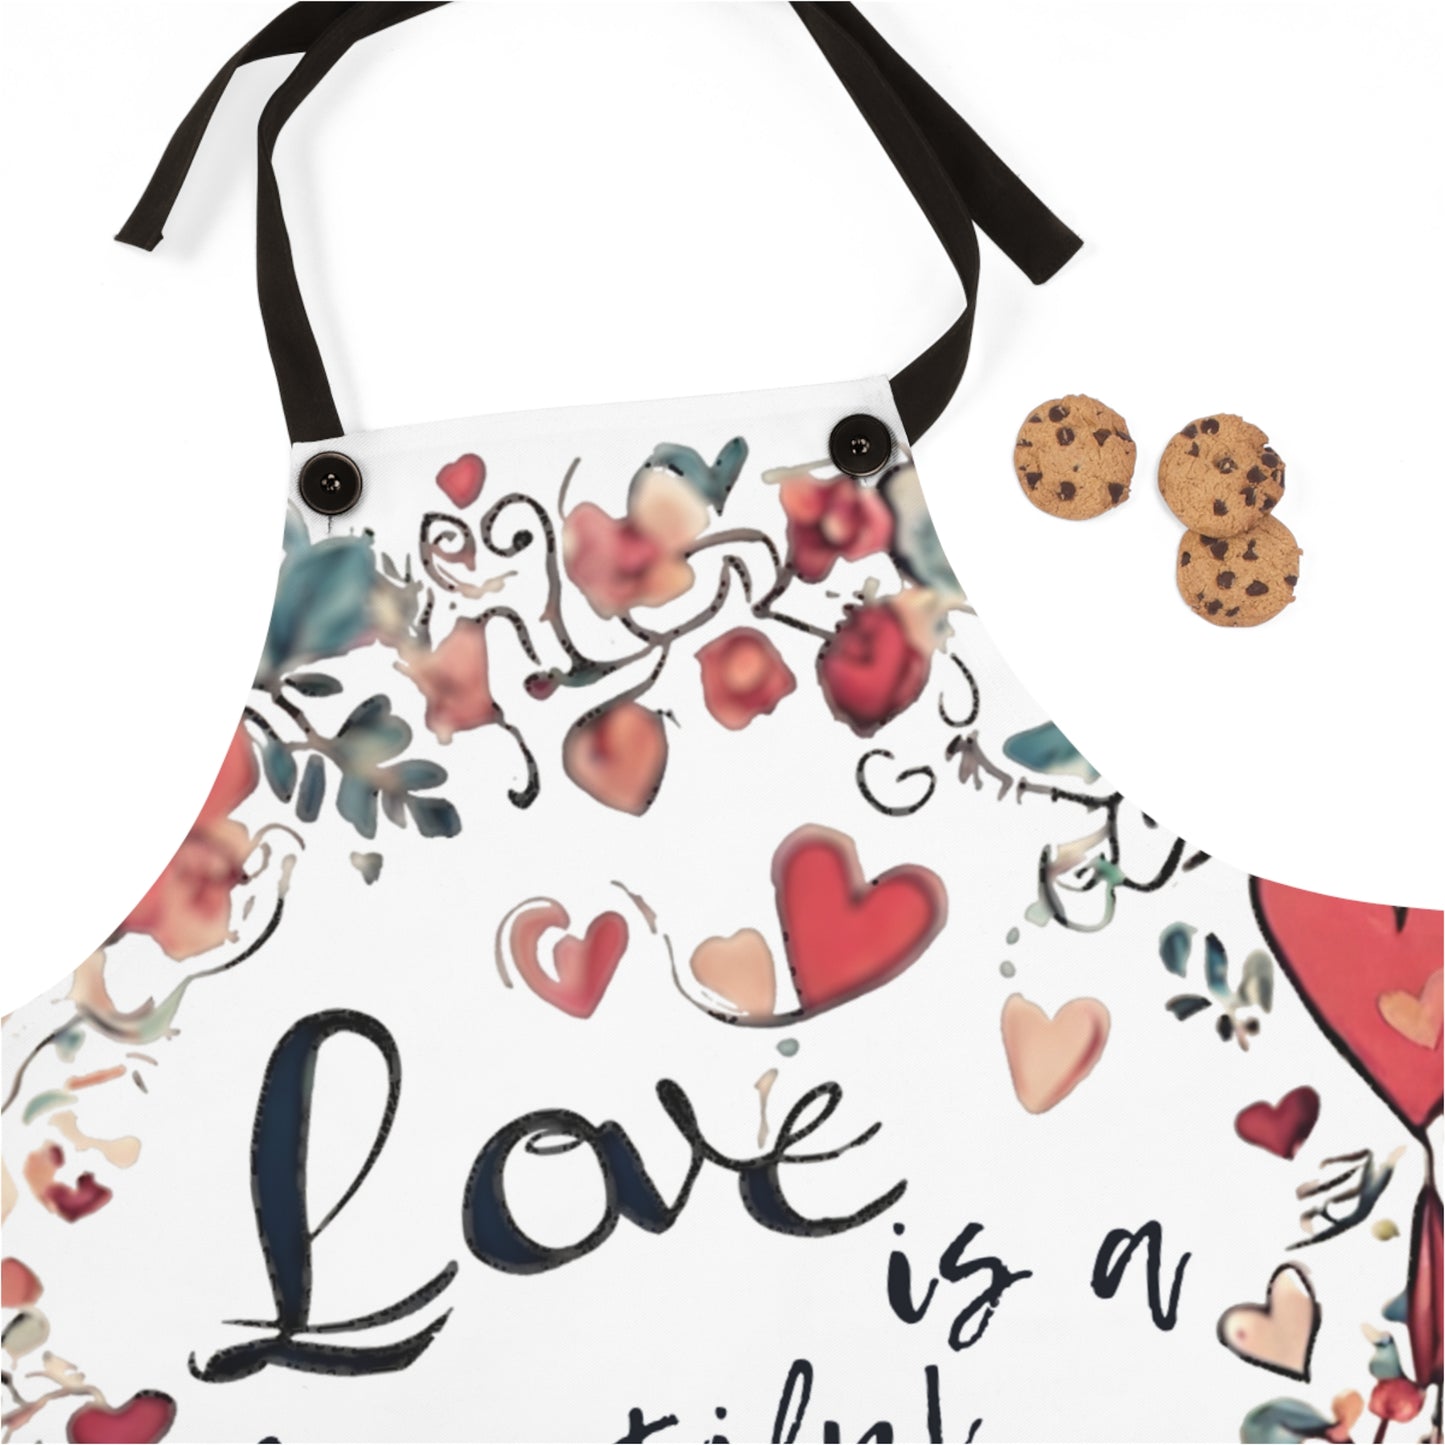 Love is a beautiful thing Apron, Artistic unique Apron great gift for the foodie in your life